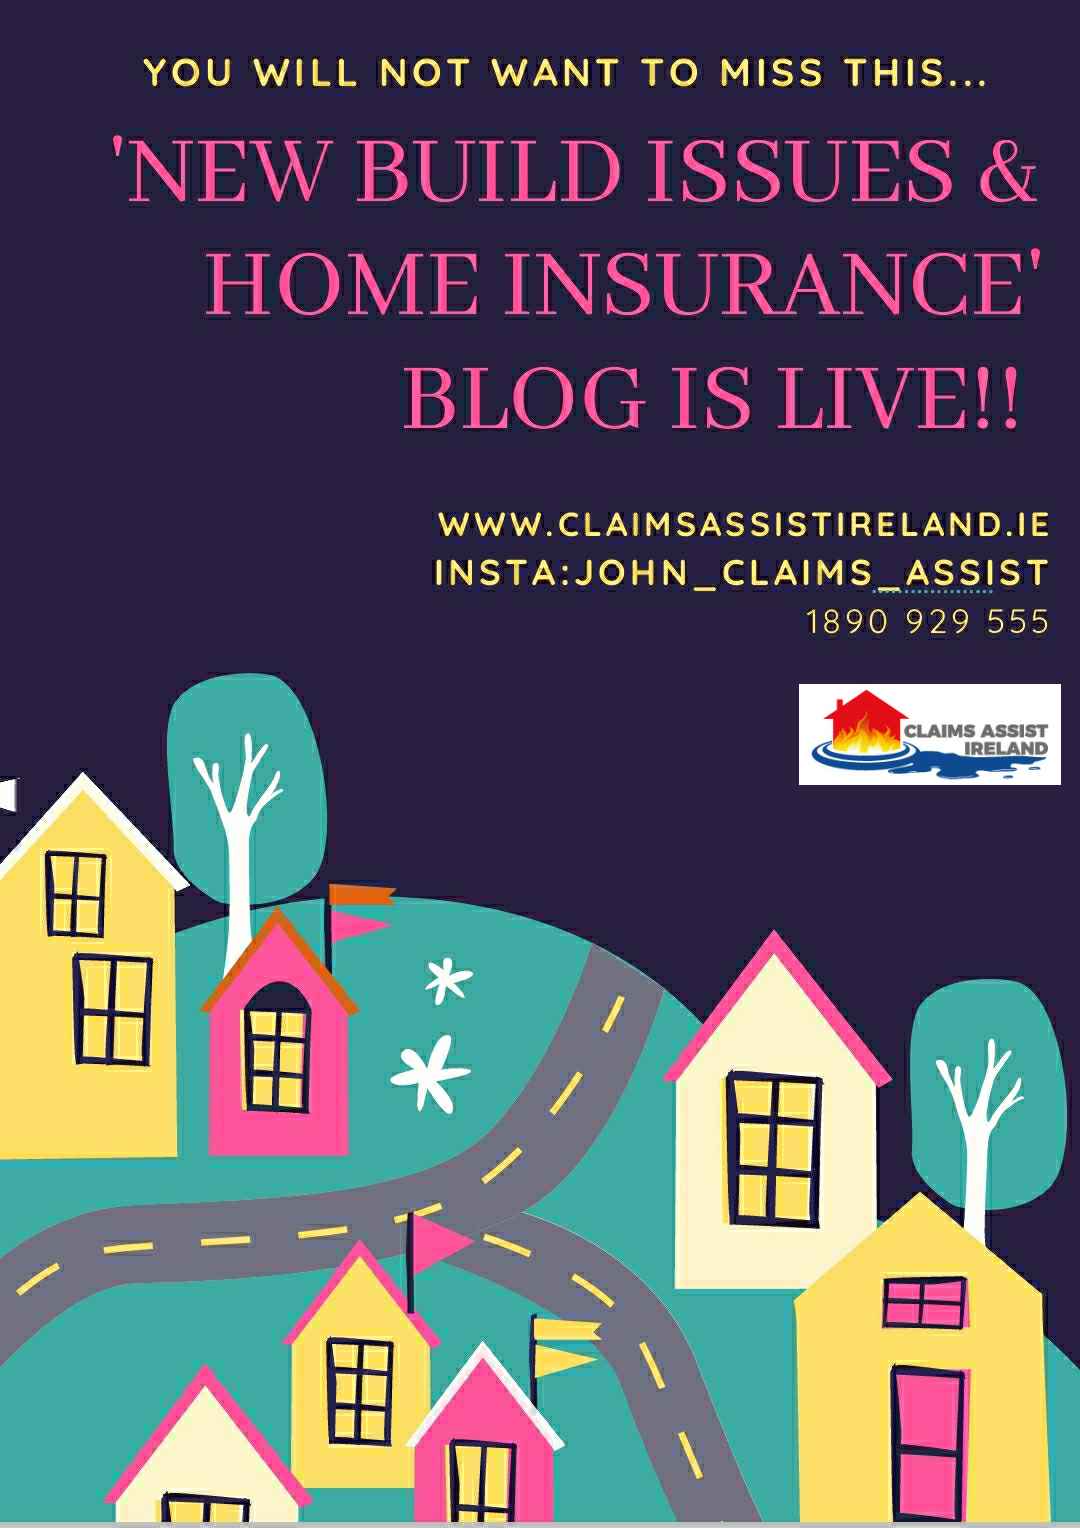 Home Insurance Claims Assist